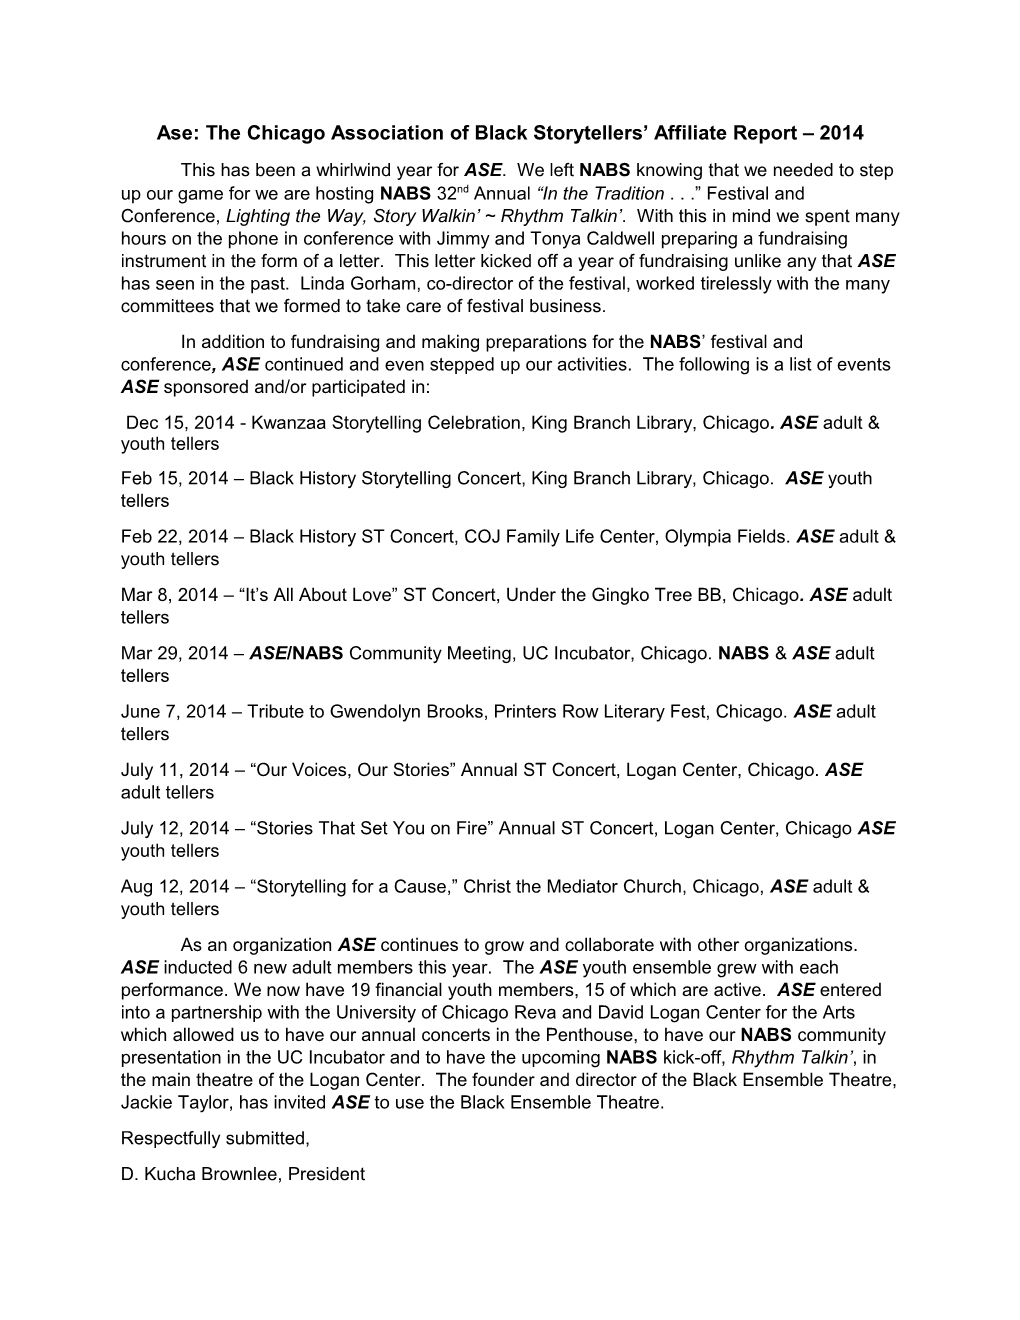 Ase: the Chicago Association of Black Storytellers Affiliate Report 2014